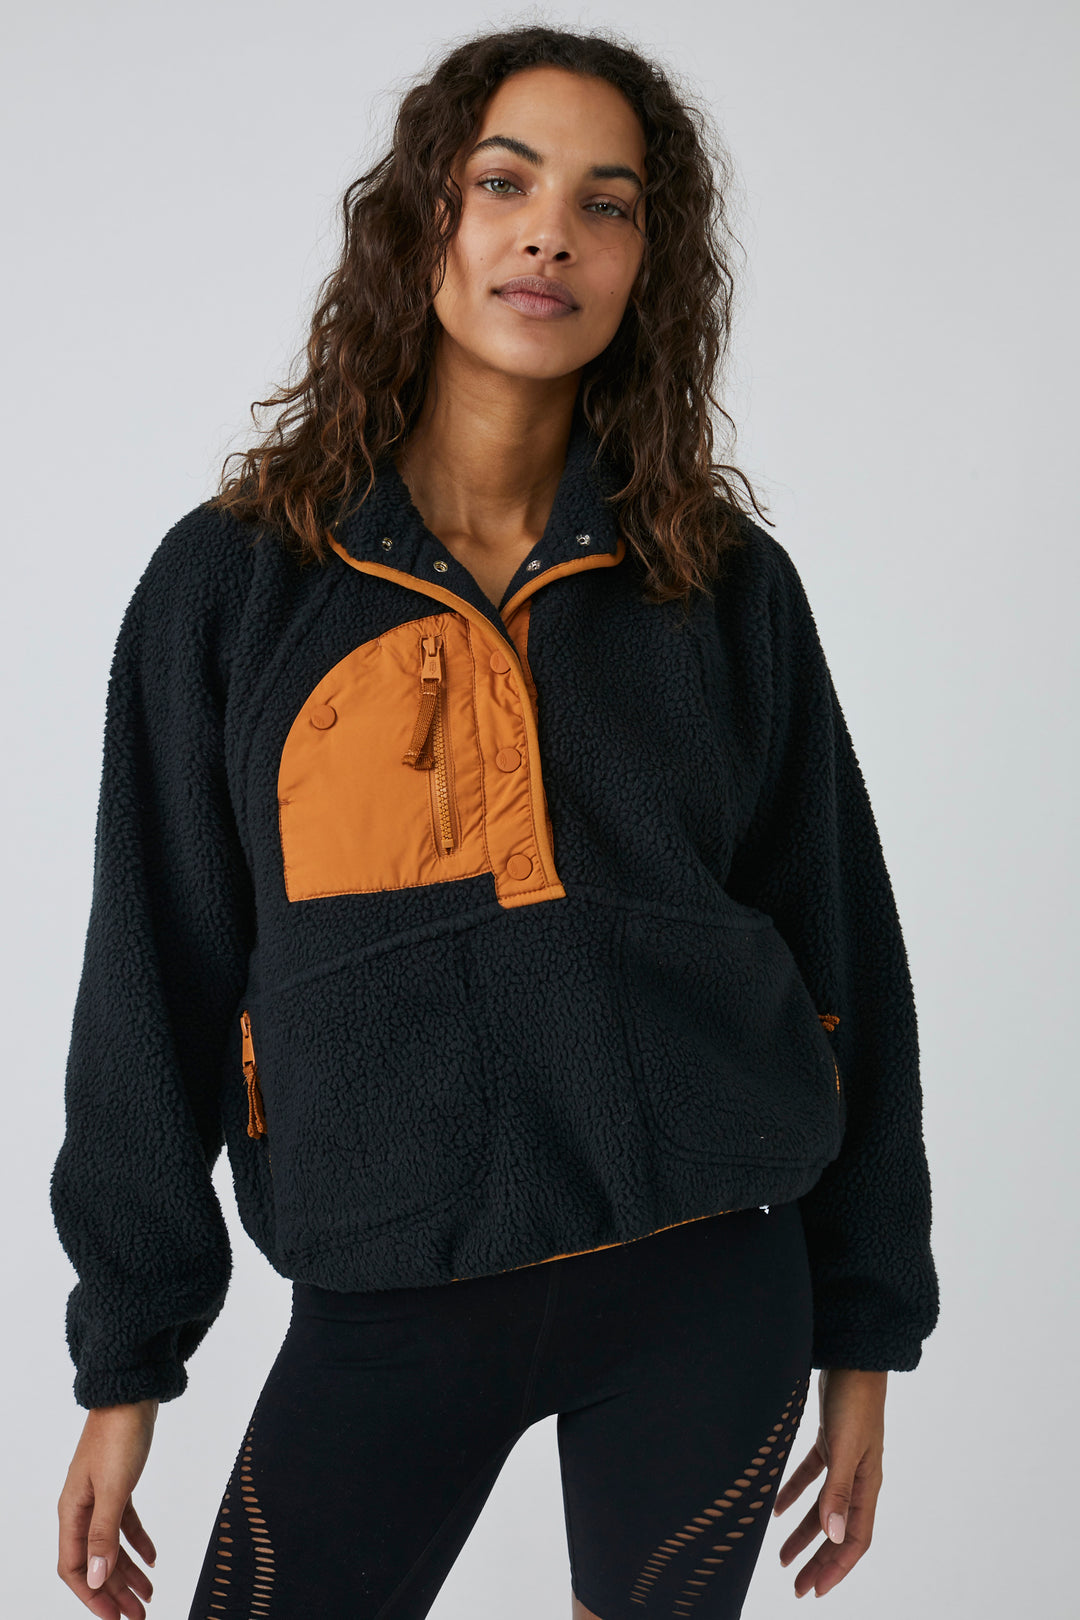 Hit the slopes pullover by Free People